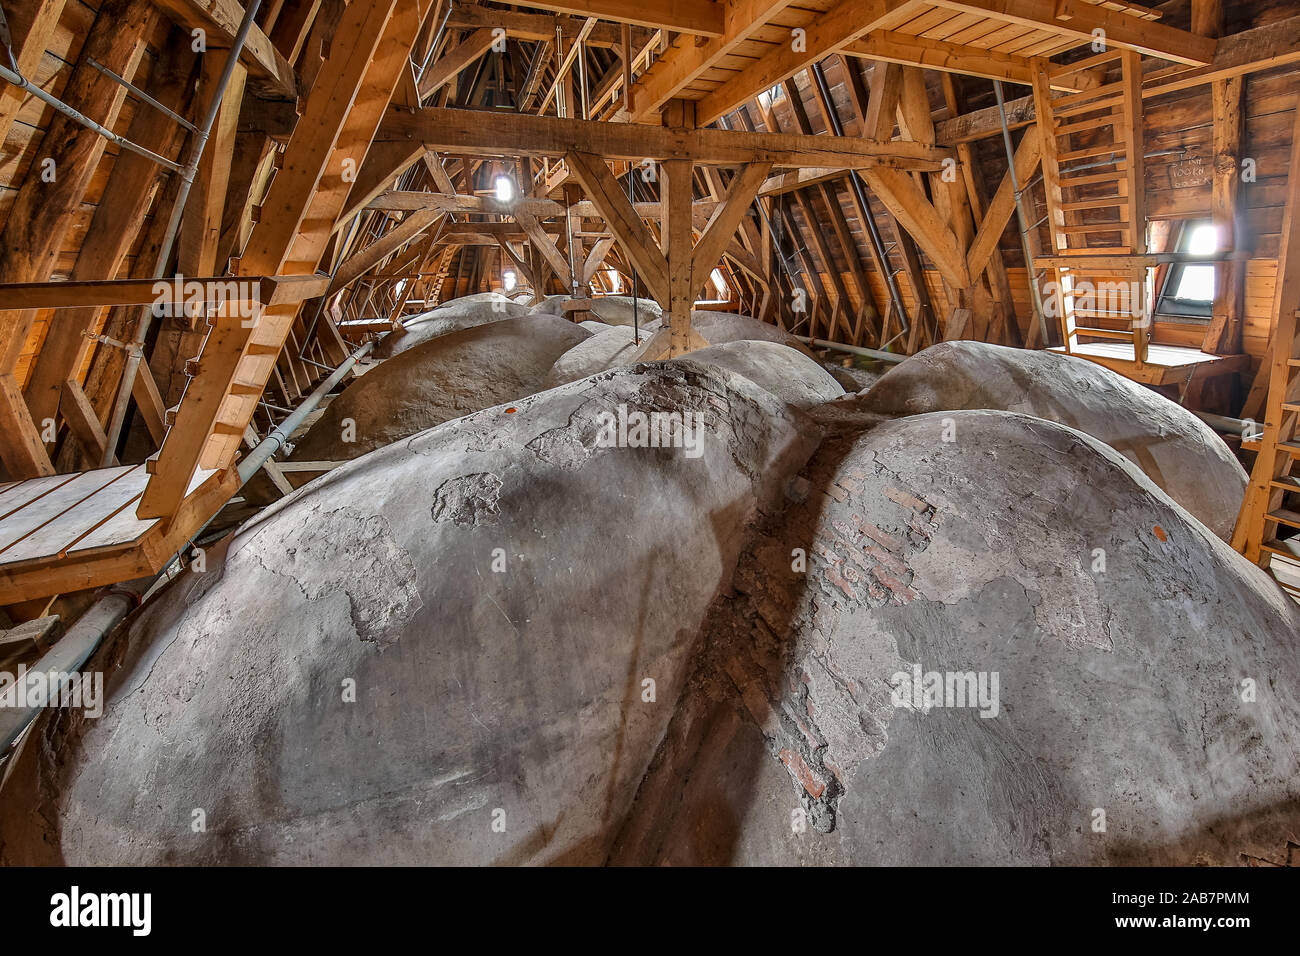 GRONINGEN, NETHERLANDS - DECEMBER 12, 2016:  Attic of an old church with domed ceiling from the 16th century in the Netherlands Stock Photo